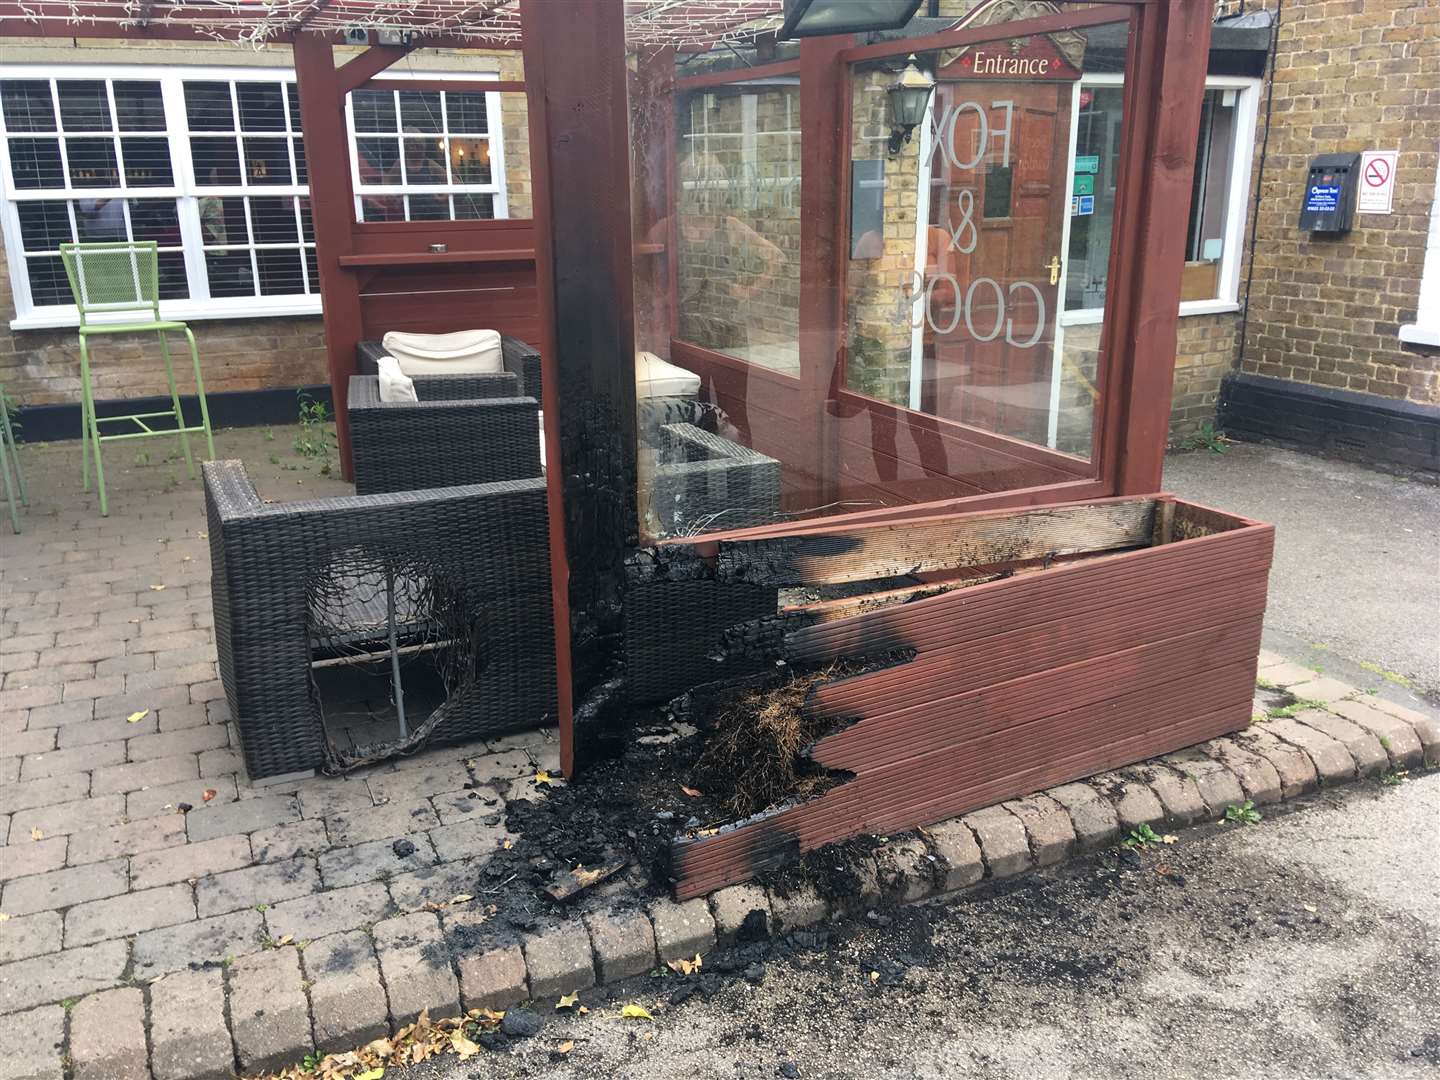 Damage at the Fox and Goose pub in Maidstone (13982262)